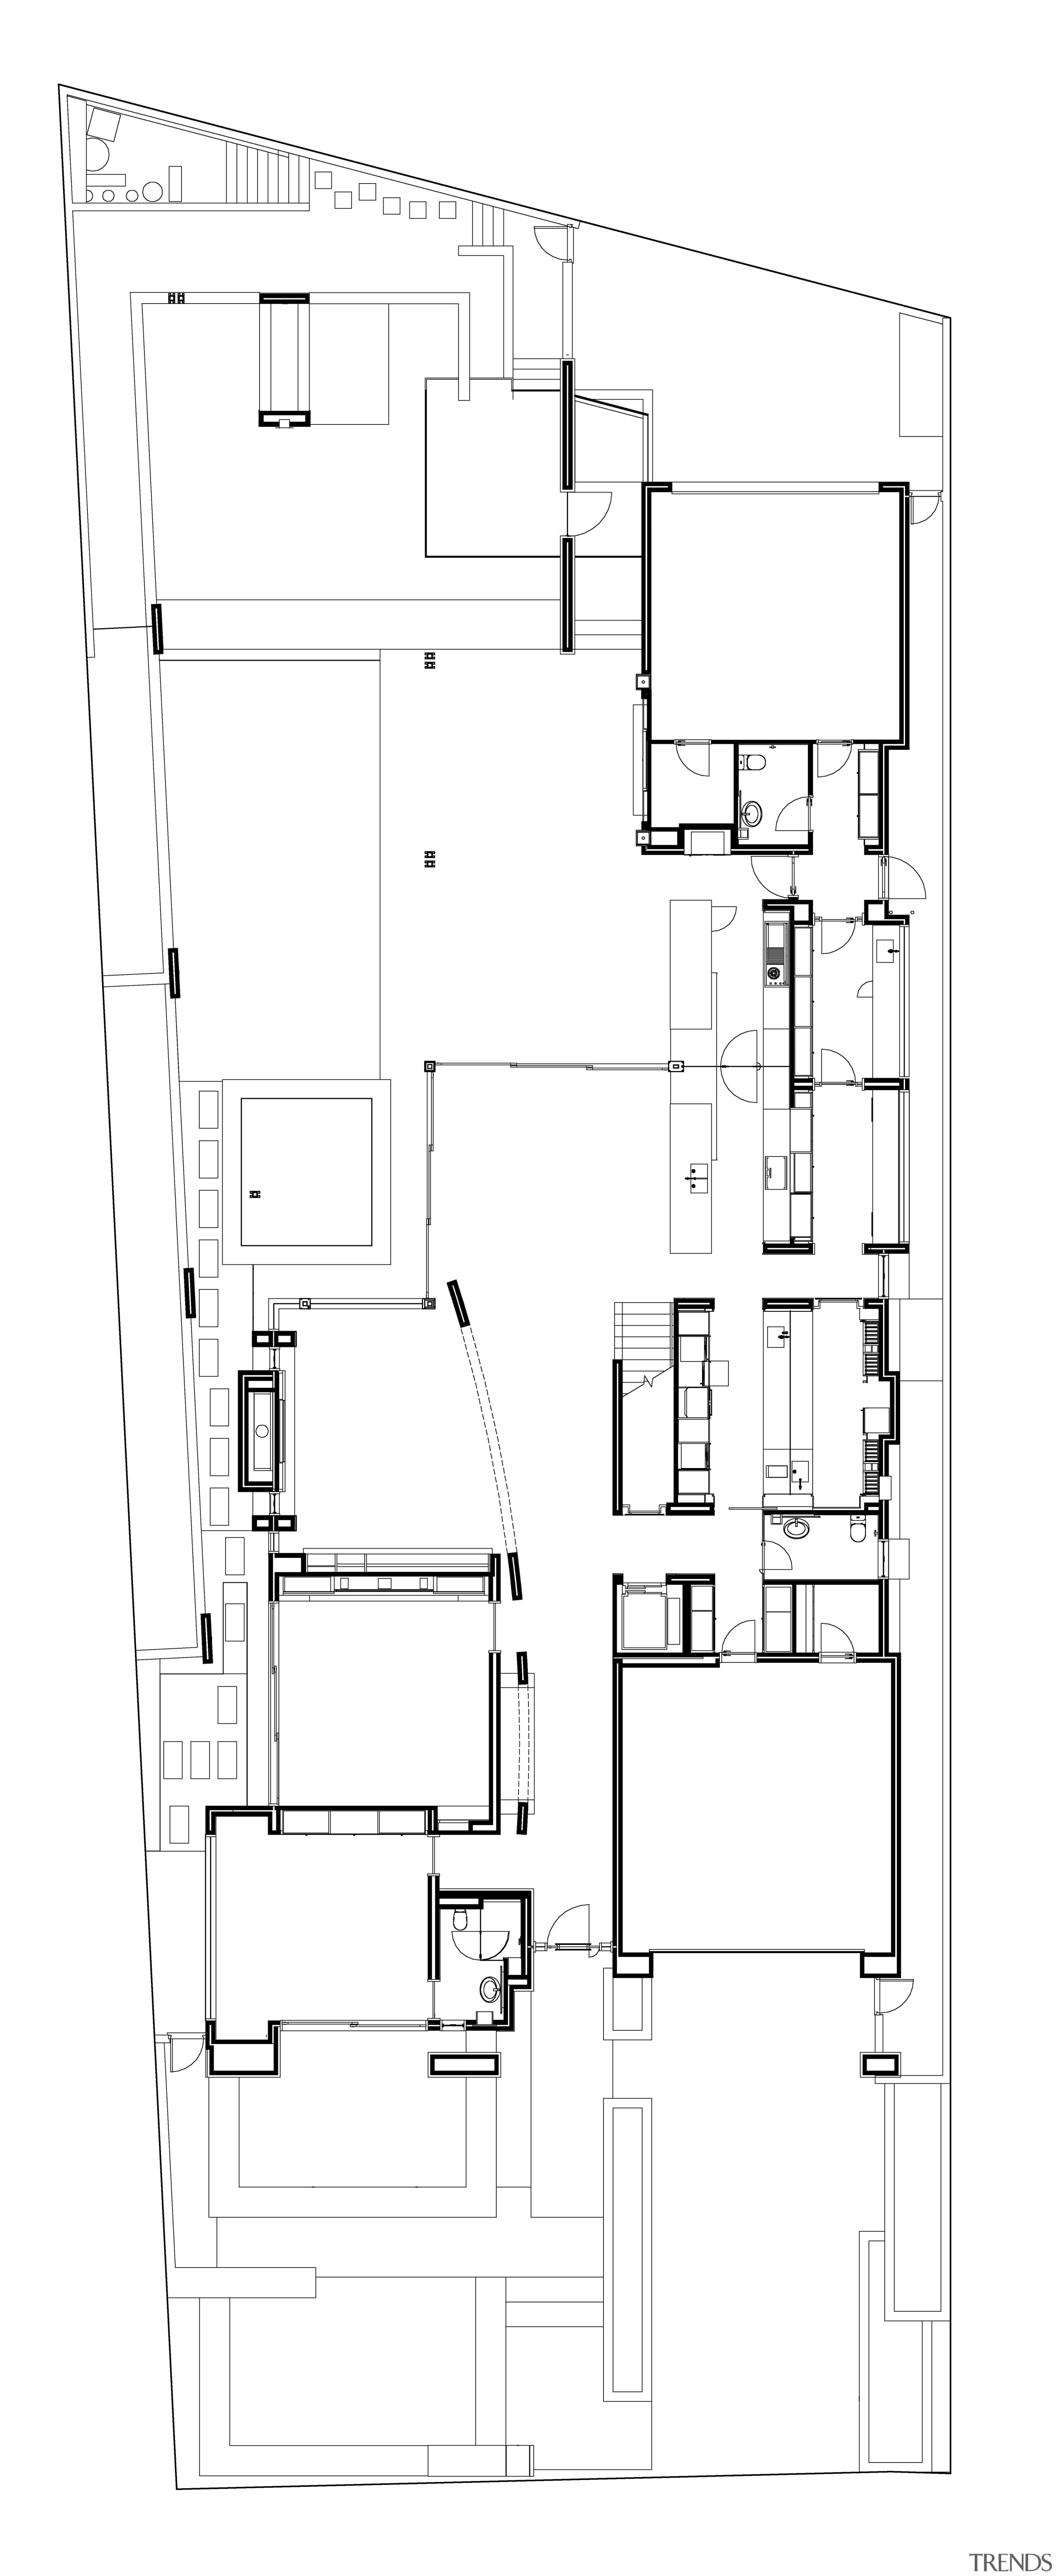 Plan of ground floor of contemporary house by angle, architecture, area, black and white, design, drawing, floor plan, line, plan, product, product design, square, white